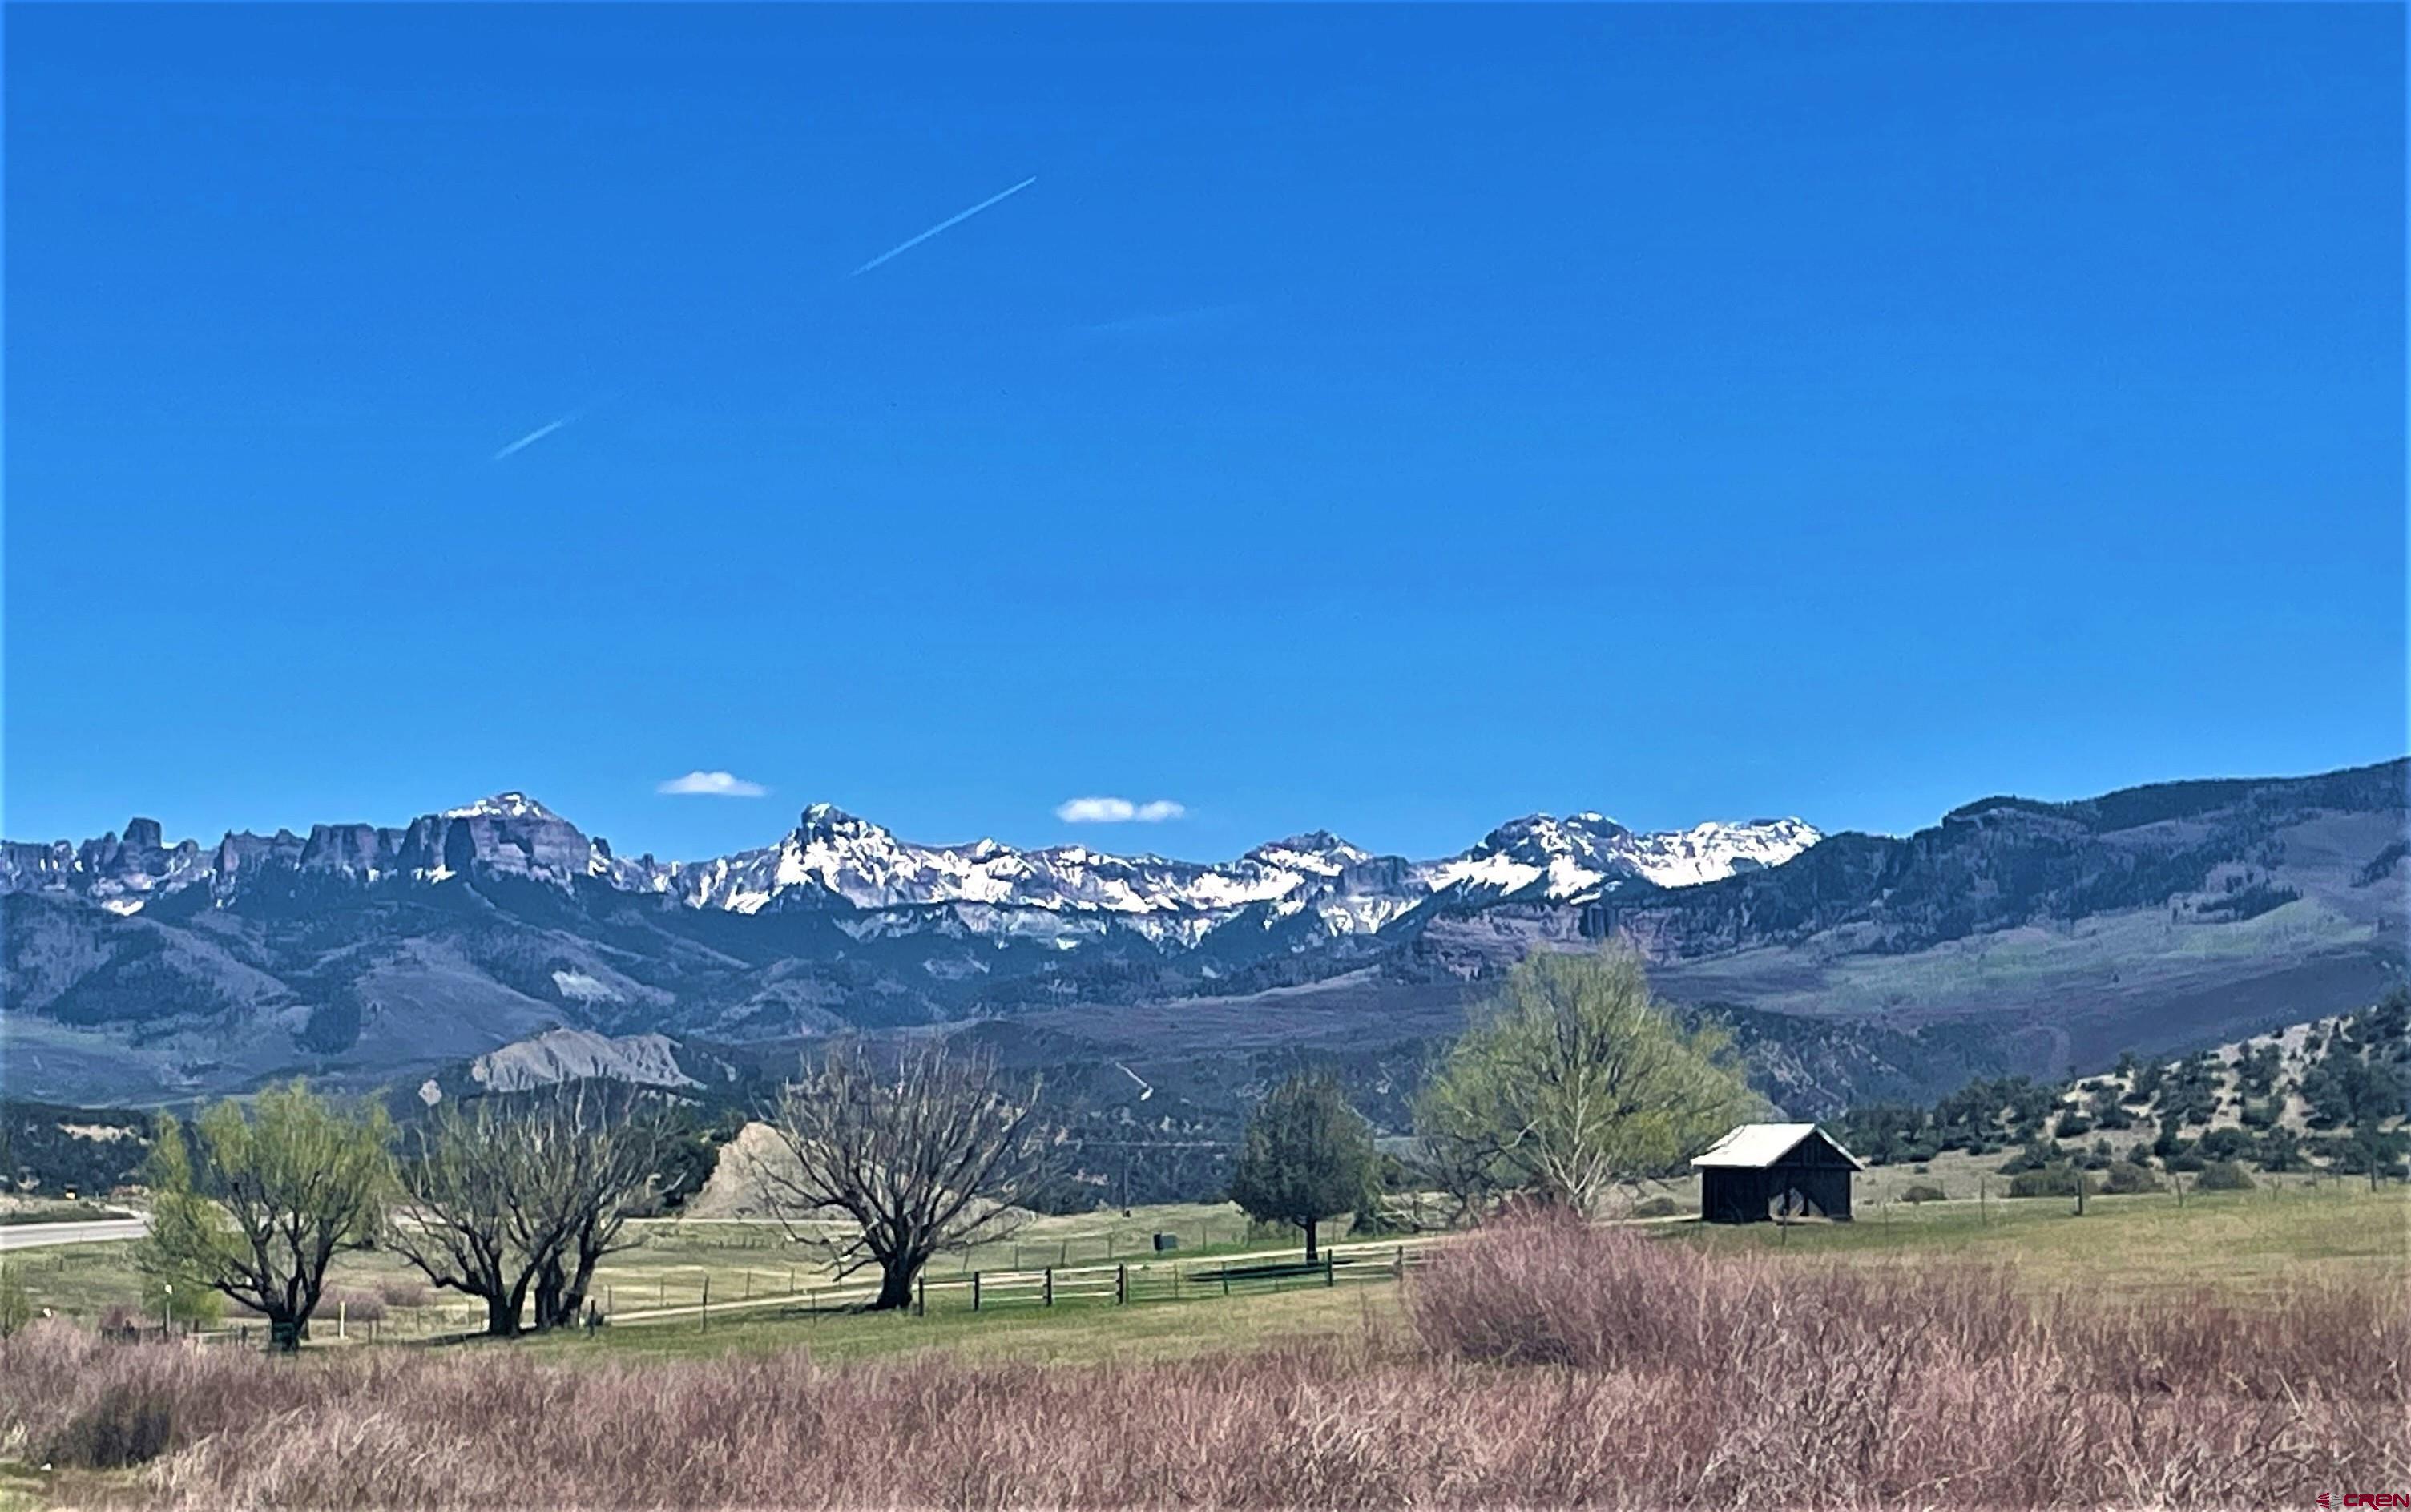 Ridgway, Colorado-35 acres of Ag land. 2 Ponds. 12 acres in Irrigation. Hay producing. Dallas Ditch. Views to Cimarrons /Loghill and Pleasant Valley. Fronts Hwy 62.